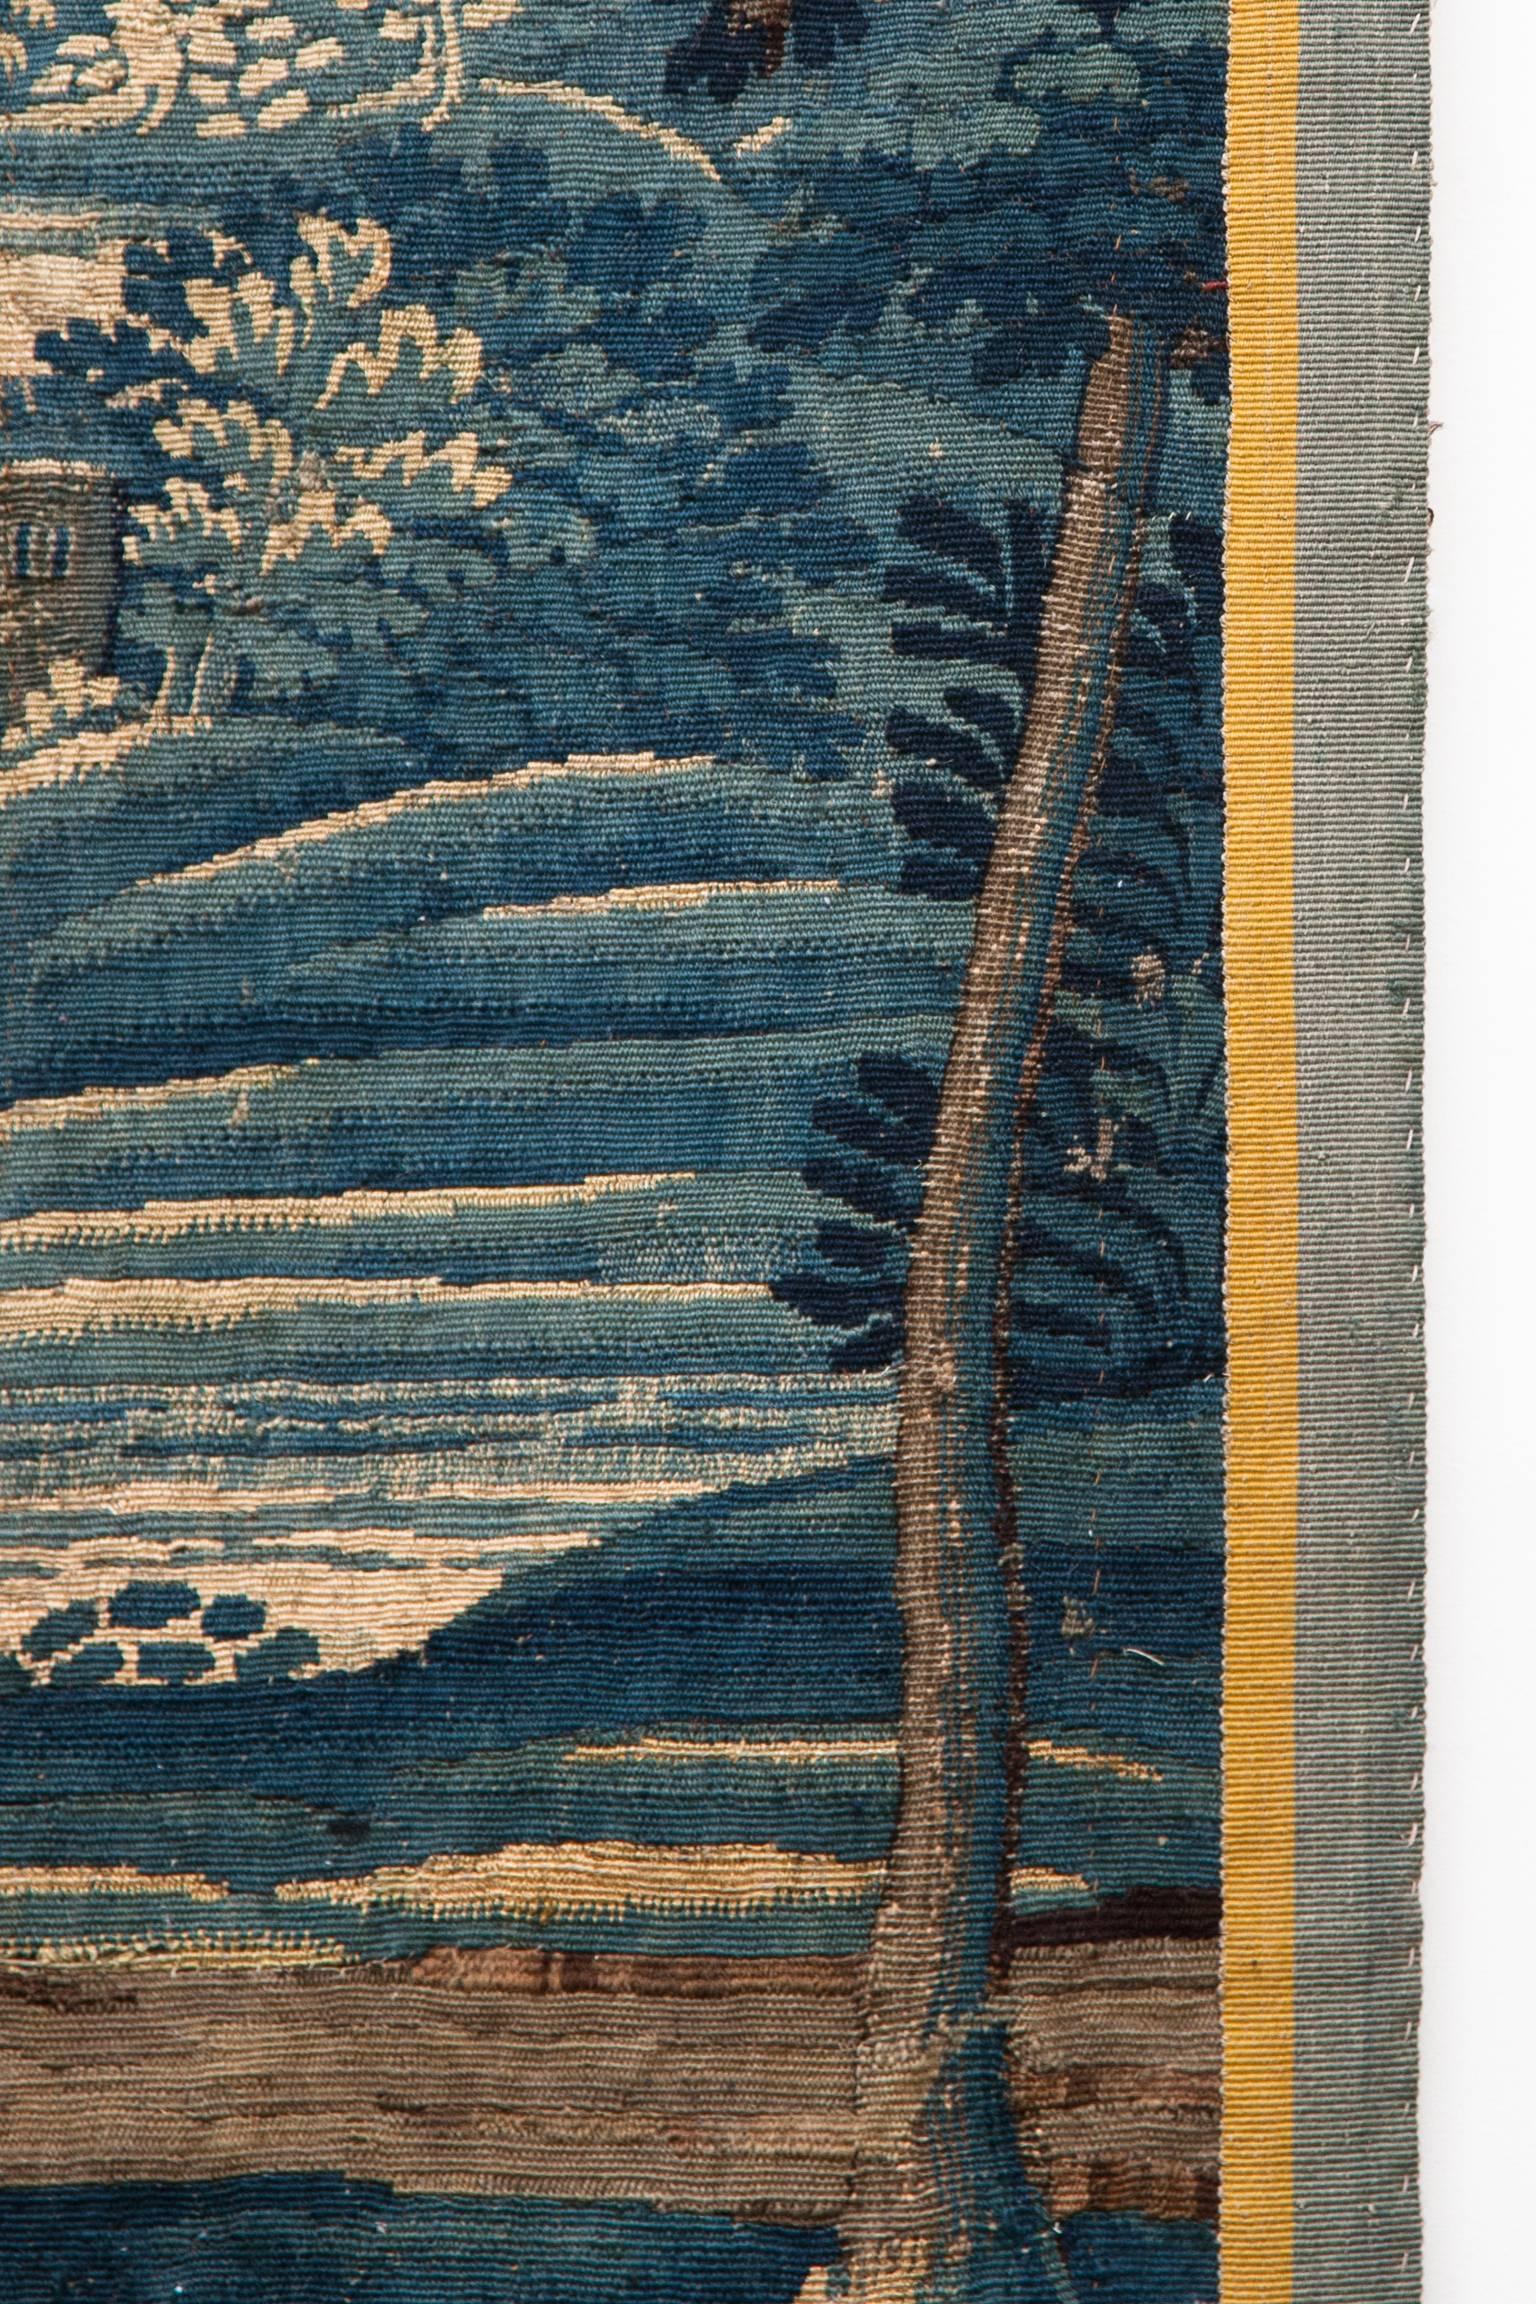 French Early 18th Century Aubusson Verdure Tapestry with Trees, a Castle and a River